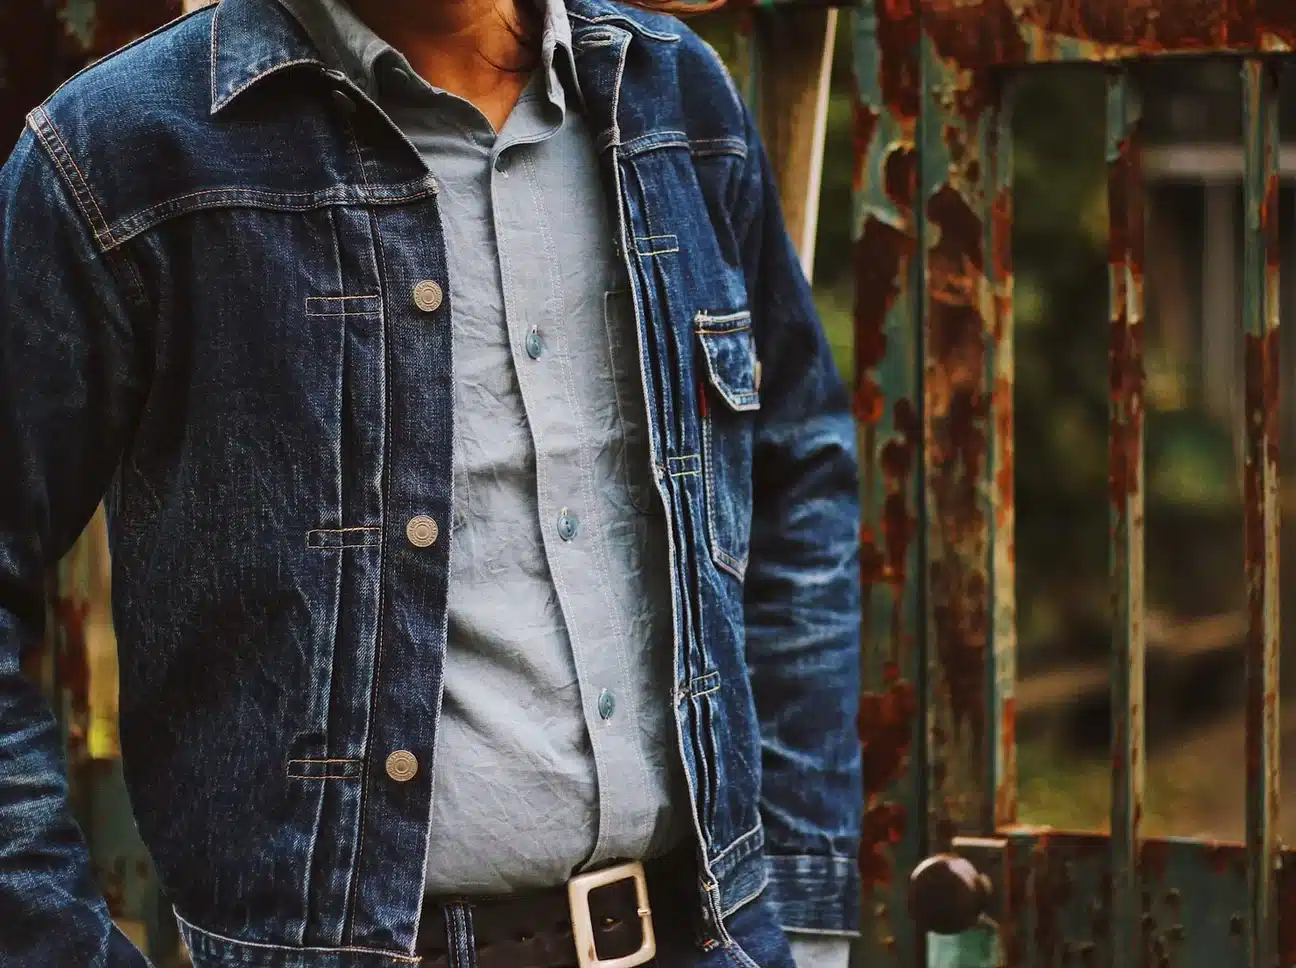 Buying Guide: Full Count Shirts and Jackets That's Made to Fade